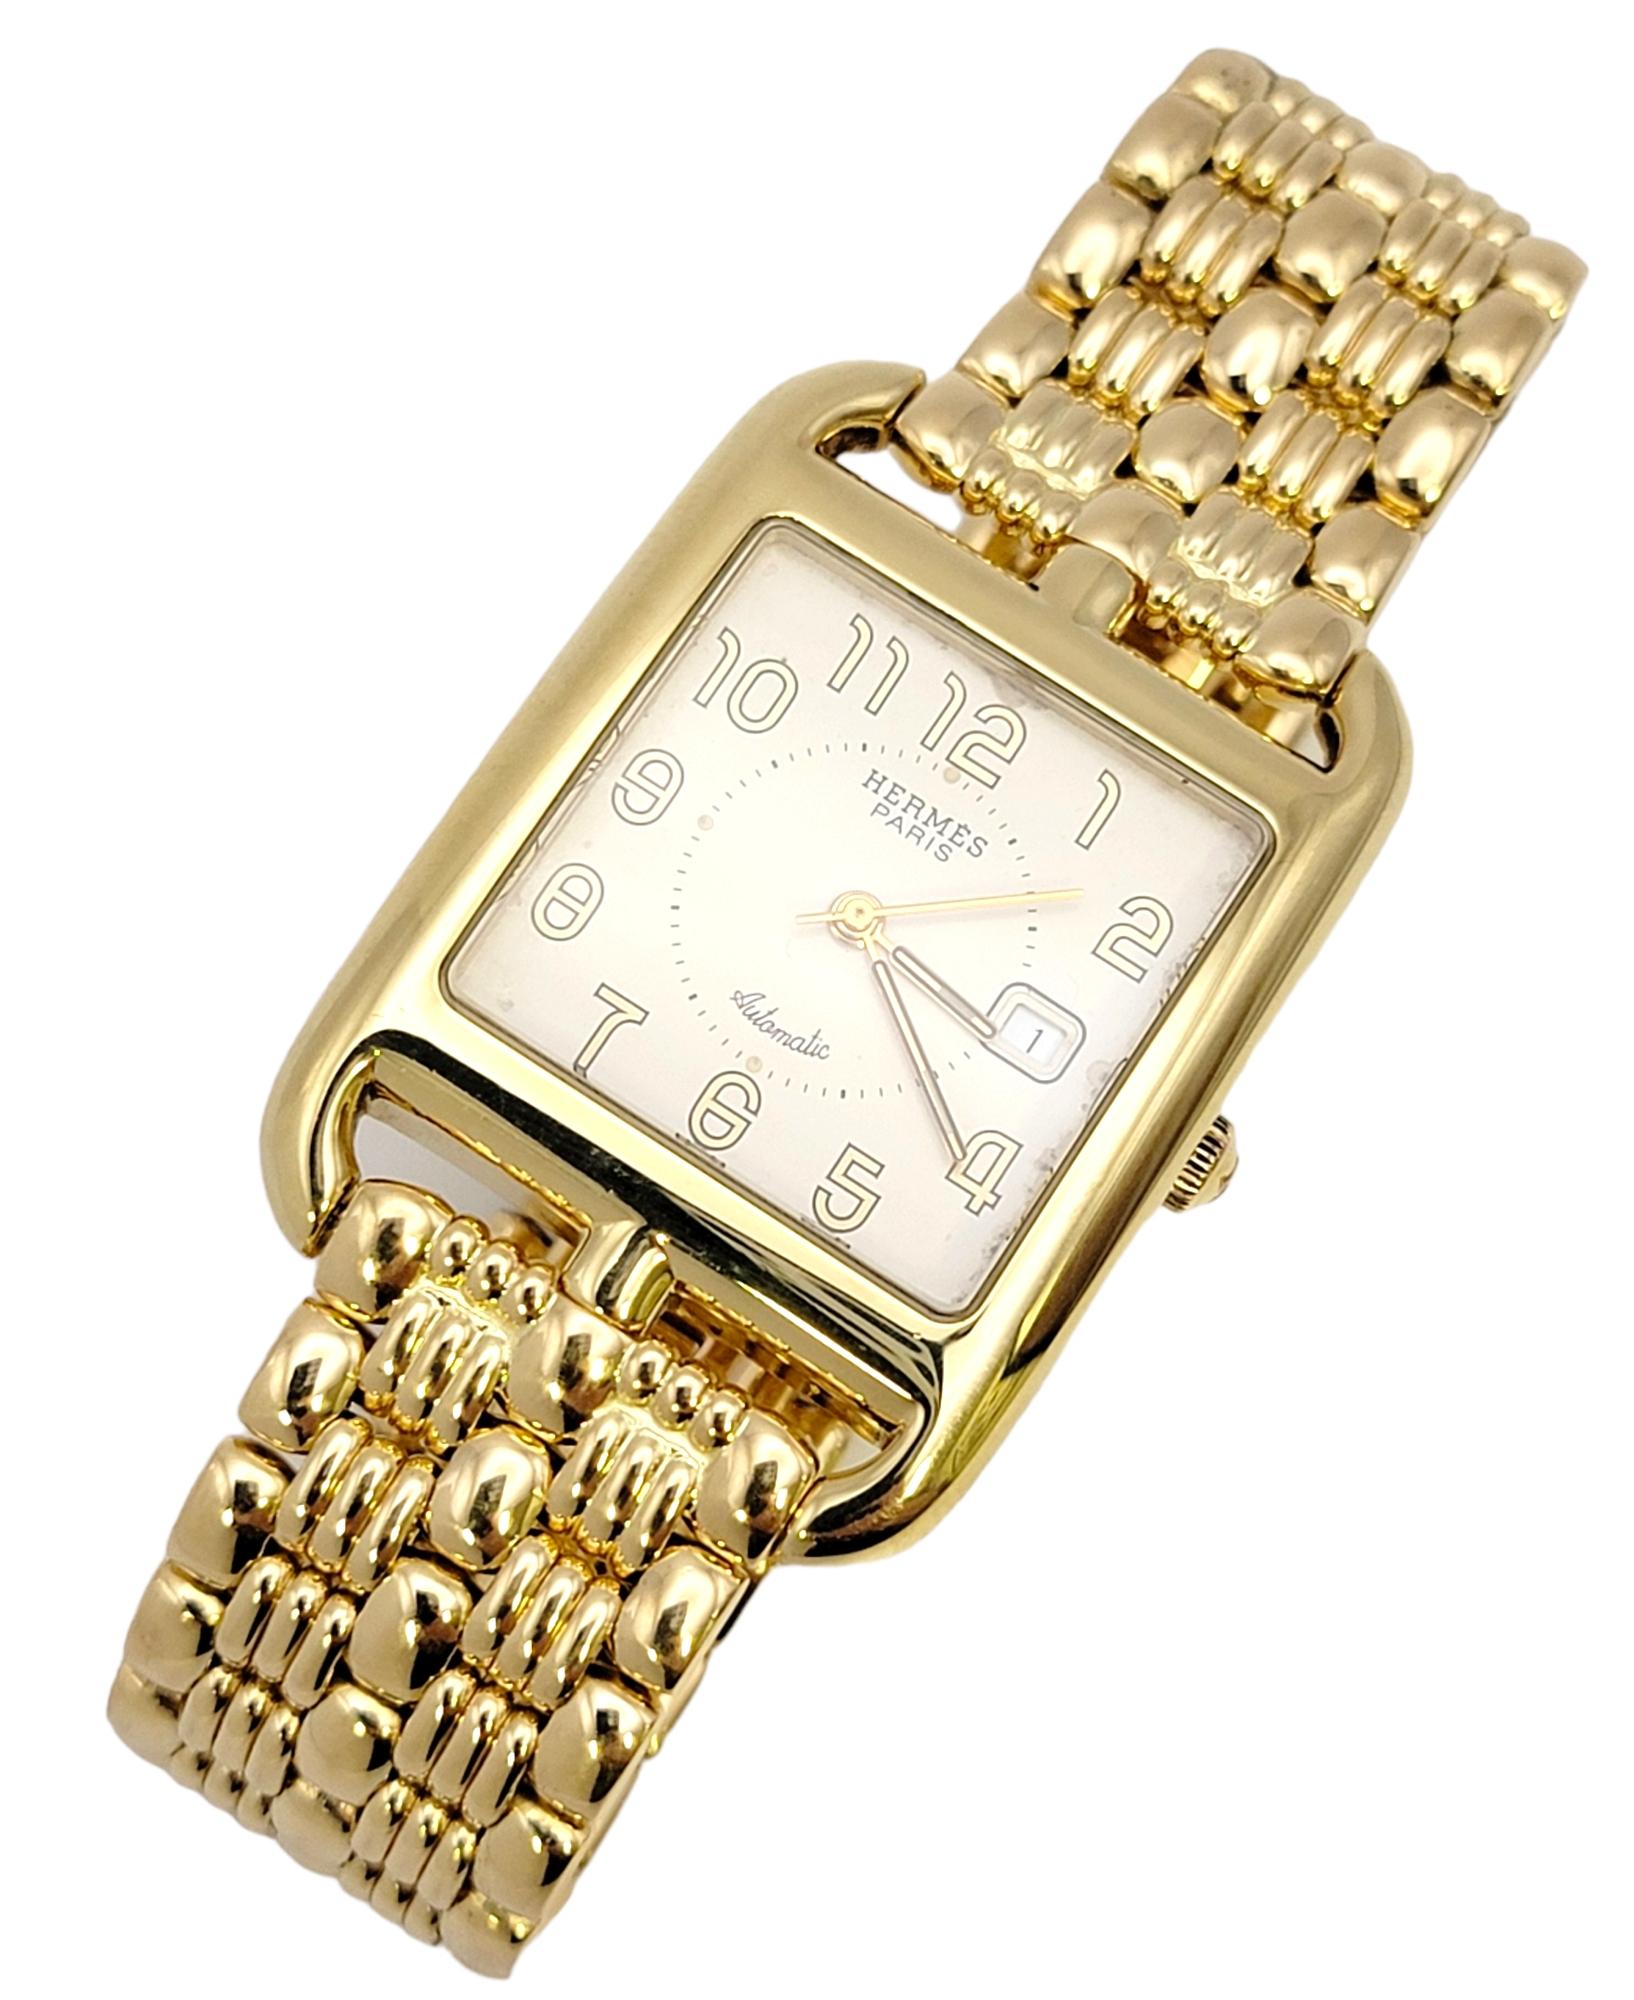 Hermes Cape Cod Automatic Wristwatch 18 Karat Yellow Gold 31 Mm Rectangular Case In Good Condition For Sale In Scottsdale, AZ